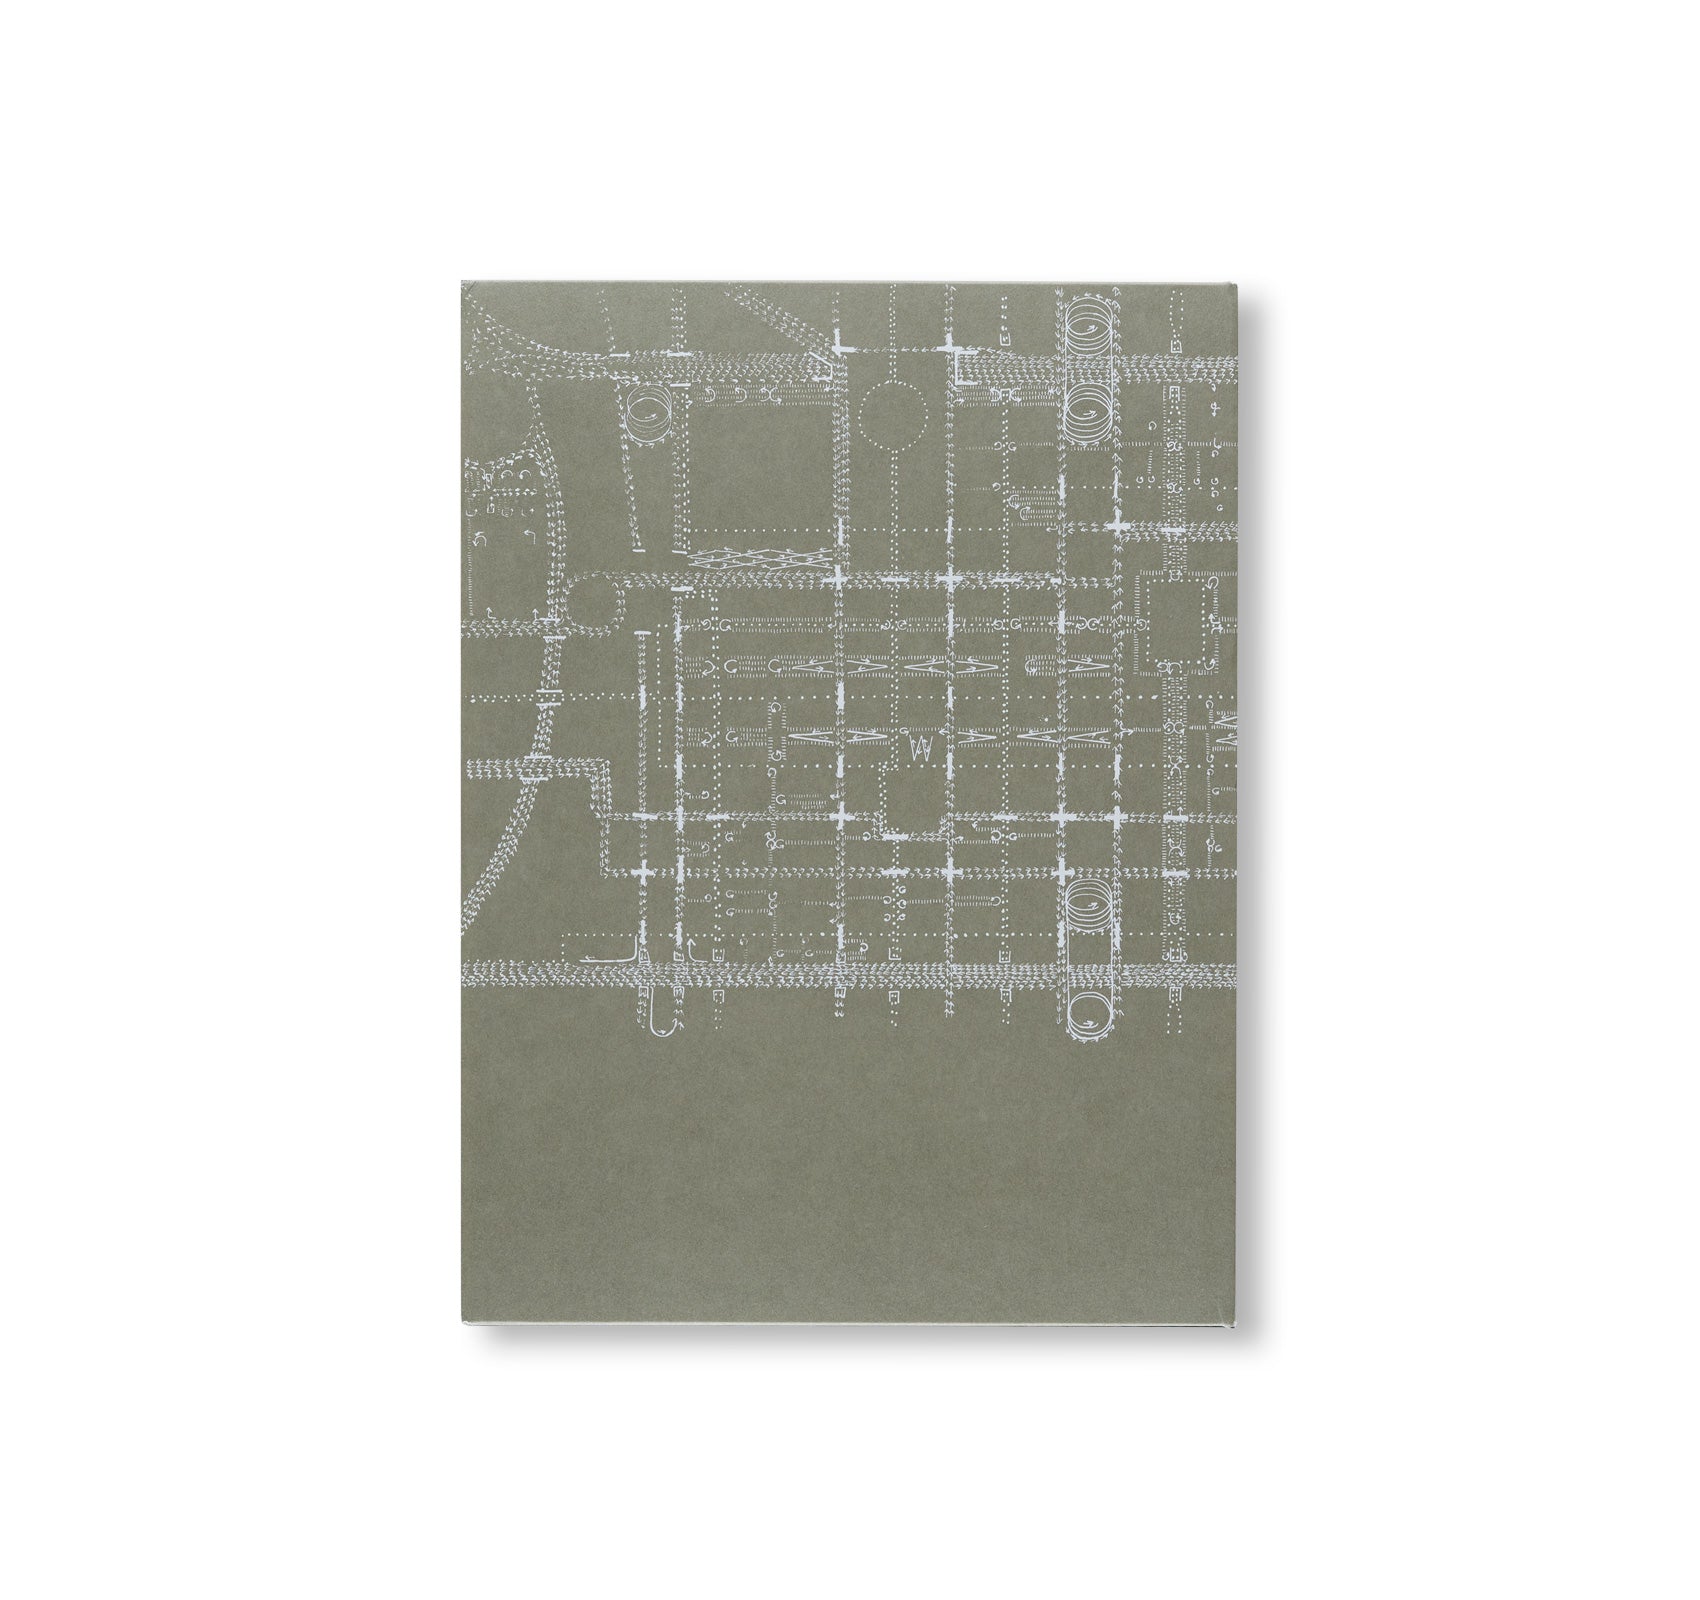 THE NOTEBOOKS AND DRAWINGS OF LOUIS I. KAHN by Louis I. Kahn